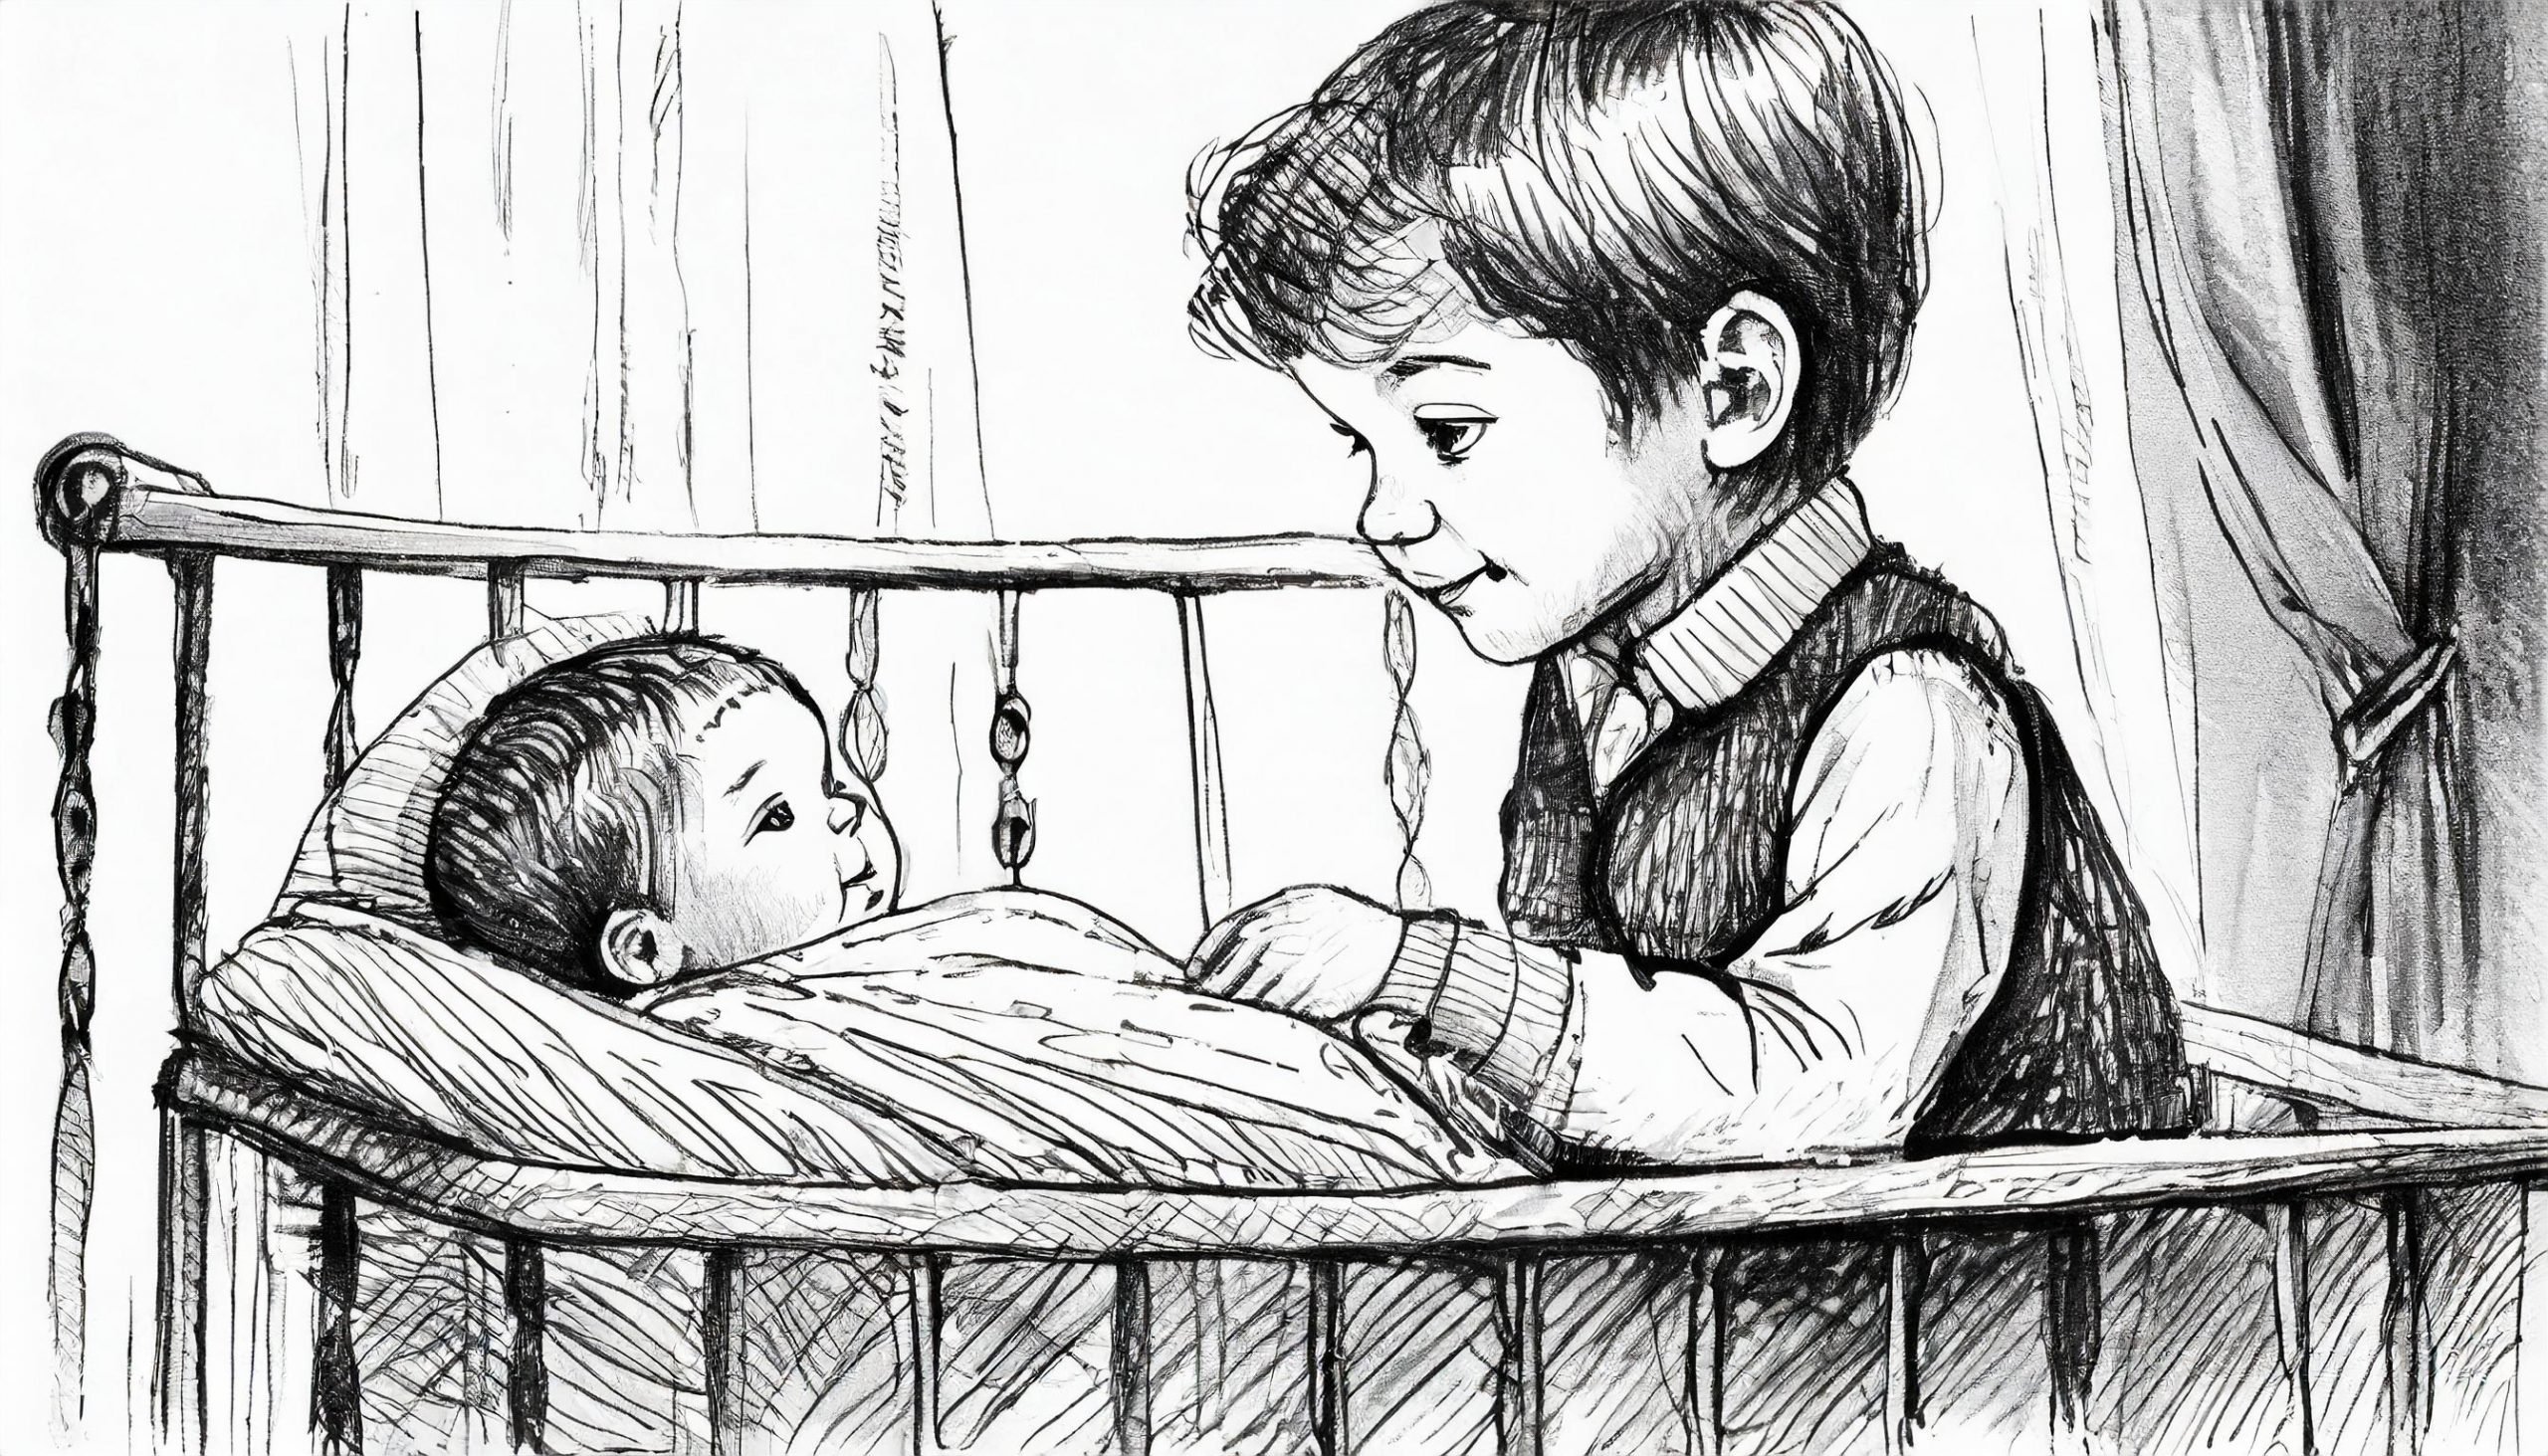 Sketch in black and white, late thirties, a small poor European boy looks at a little baby in a crib